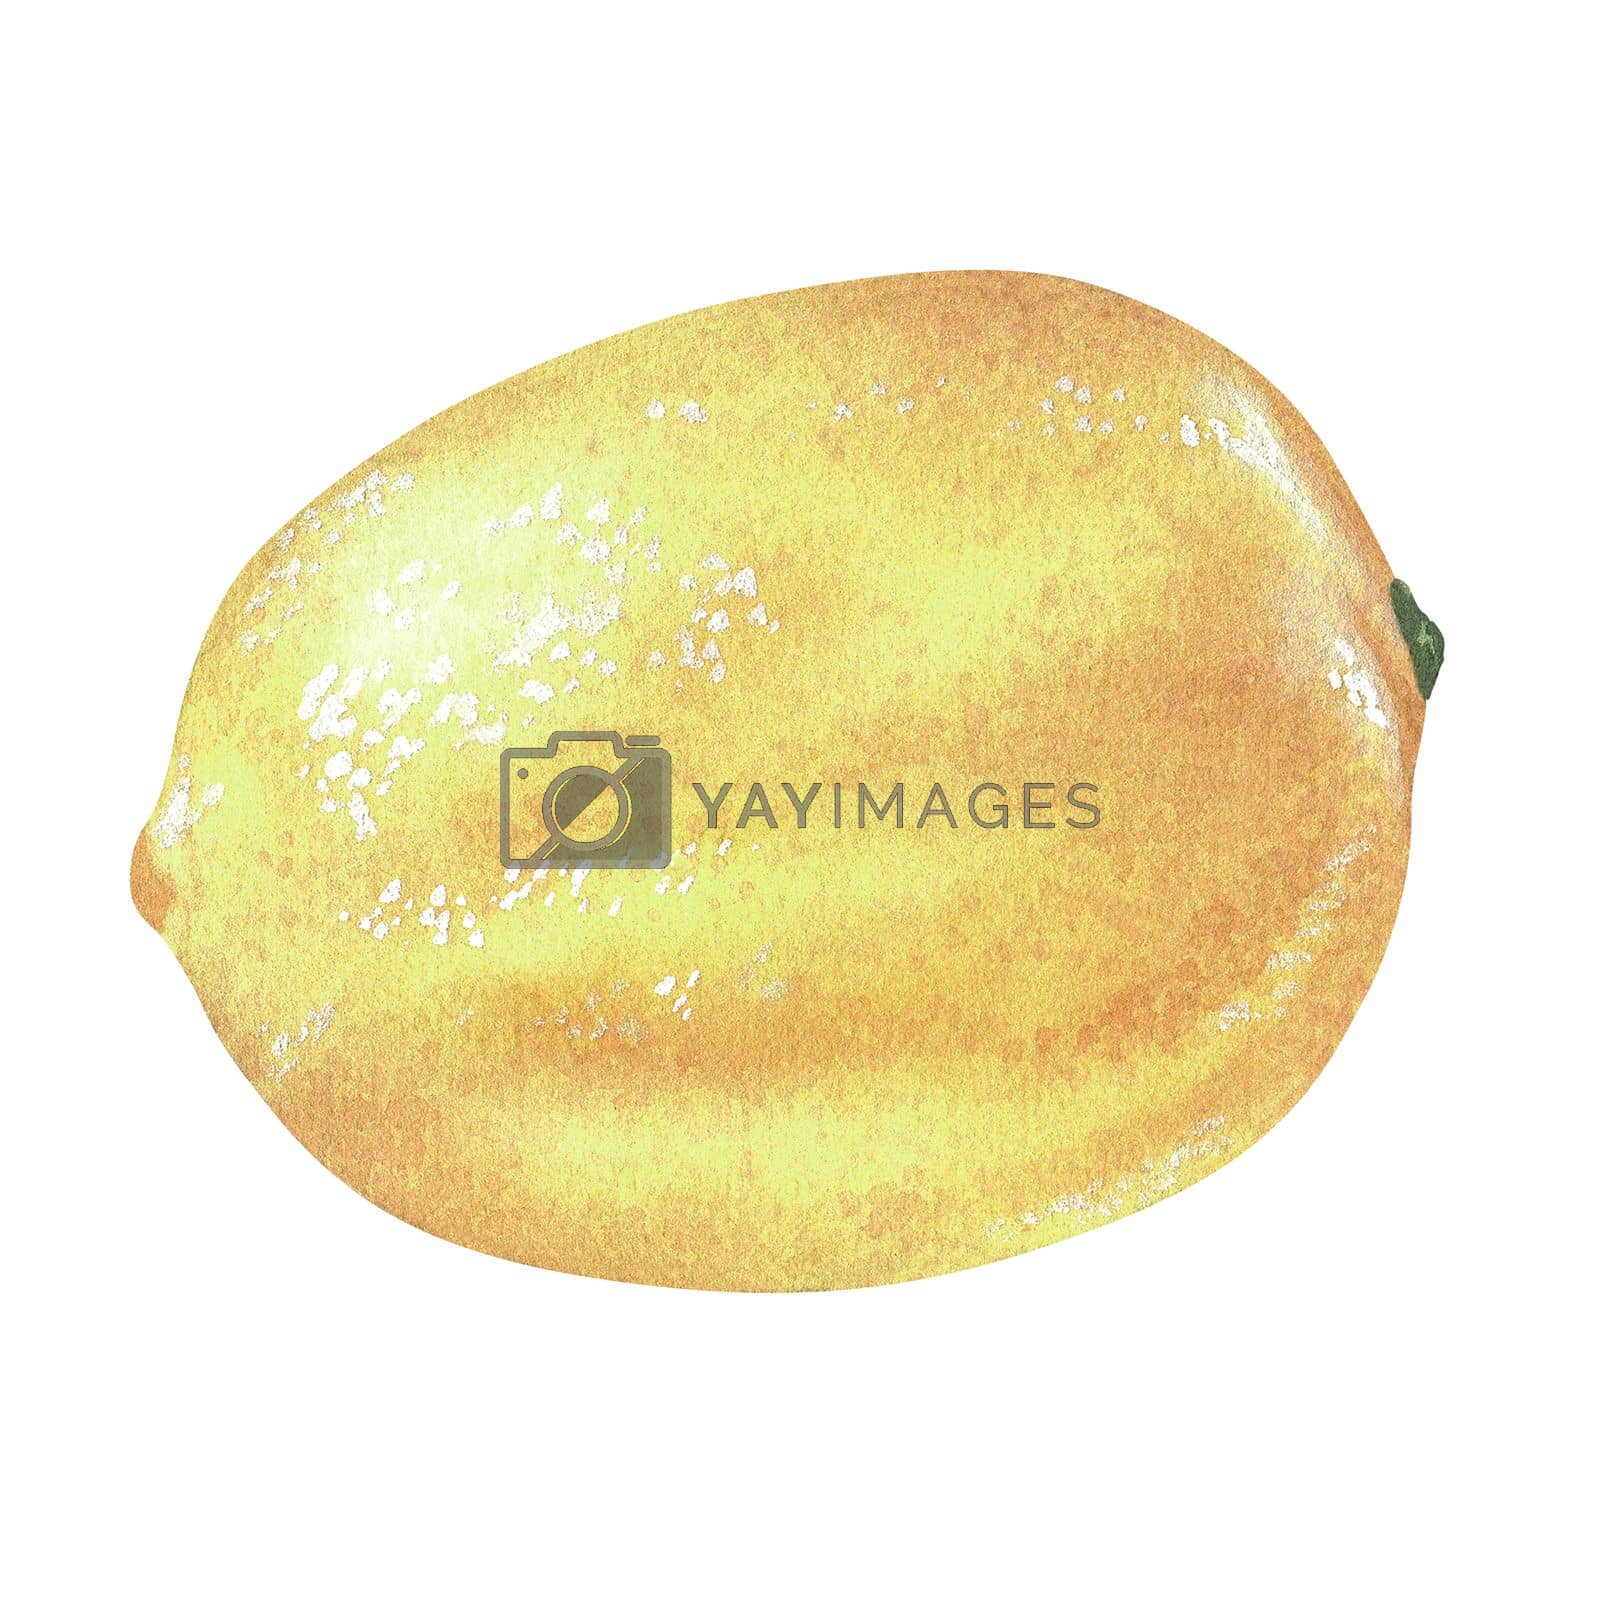 Royalty free image of Yellow lemon. Watercolor illustration. Isolated on a white background. For your design stickers, nature prints, kitchen accessories, product packaging with citrus acid or scent by Trilisti